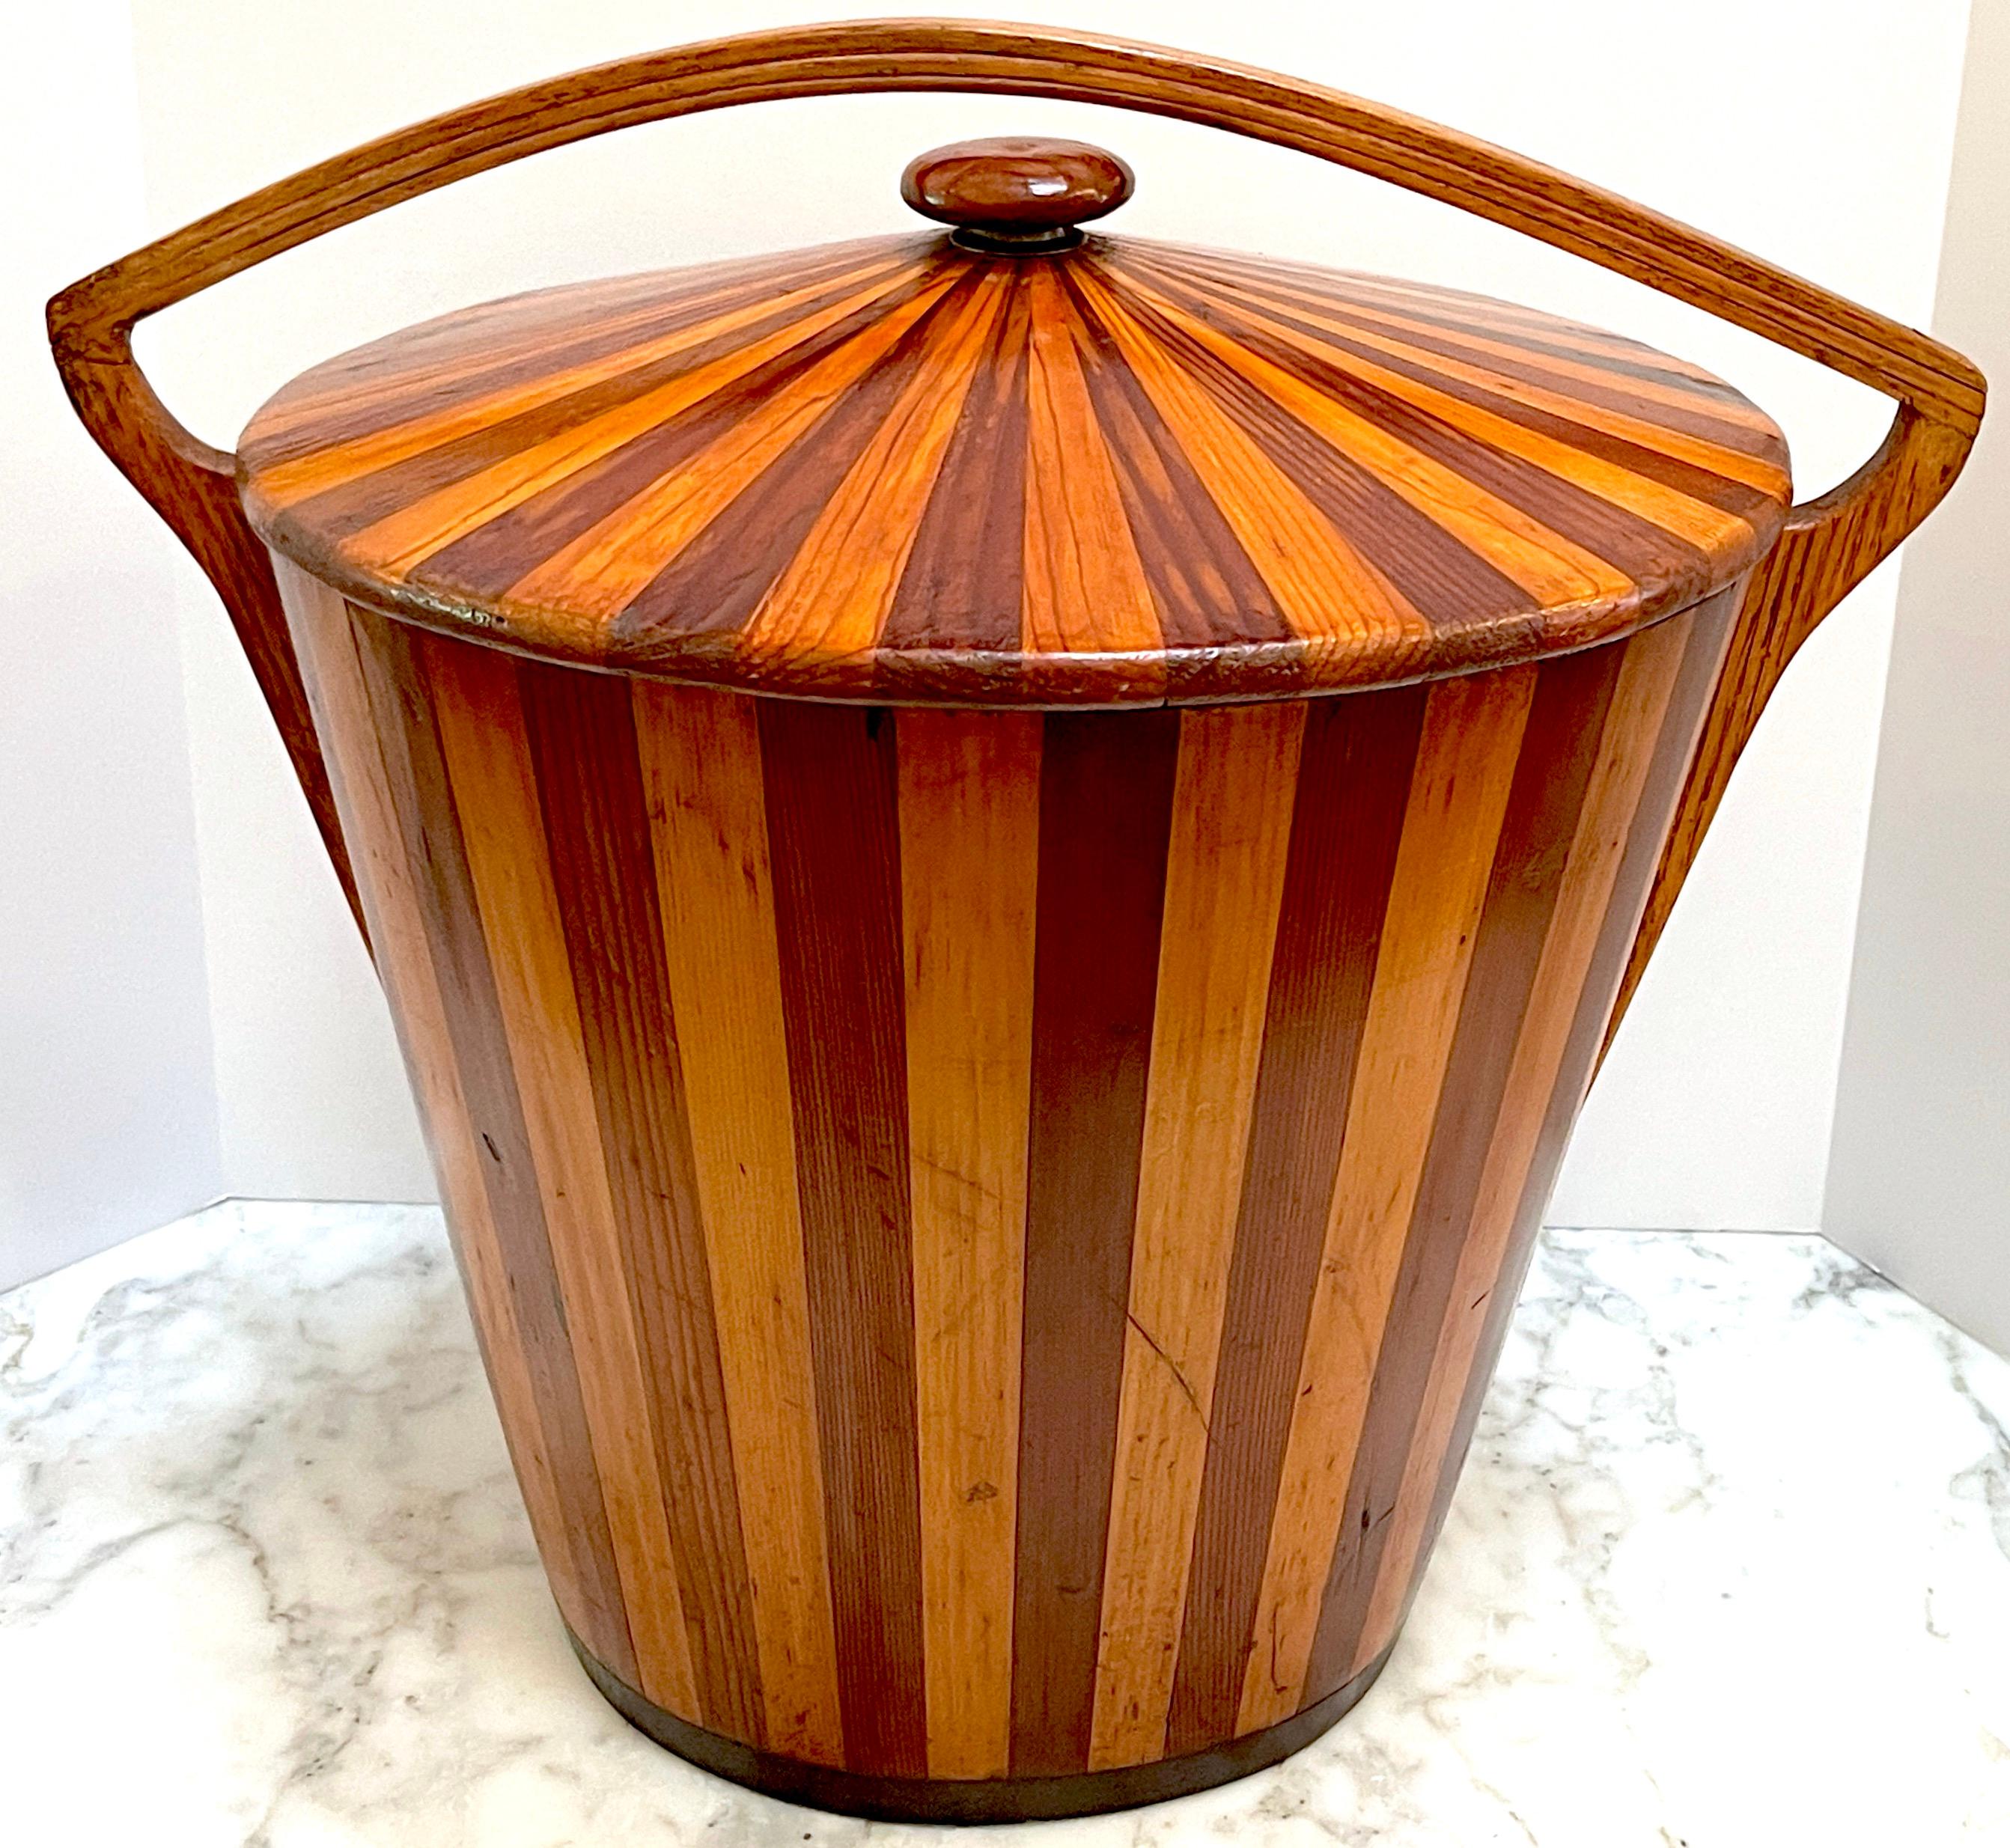 American Modernist Geometric  Inlaid Two-Tone Wood Lidded Bucket /Vessel, 1950s 

Presenting a tour de force of unknown American modern design, this inlaid two-tone wood lidded bucket/vessel from the 1950s is a remarkable piece that showcases the